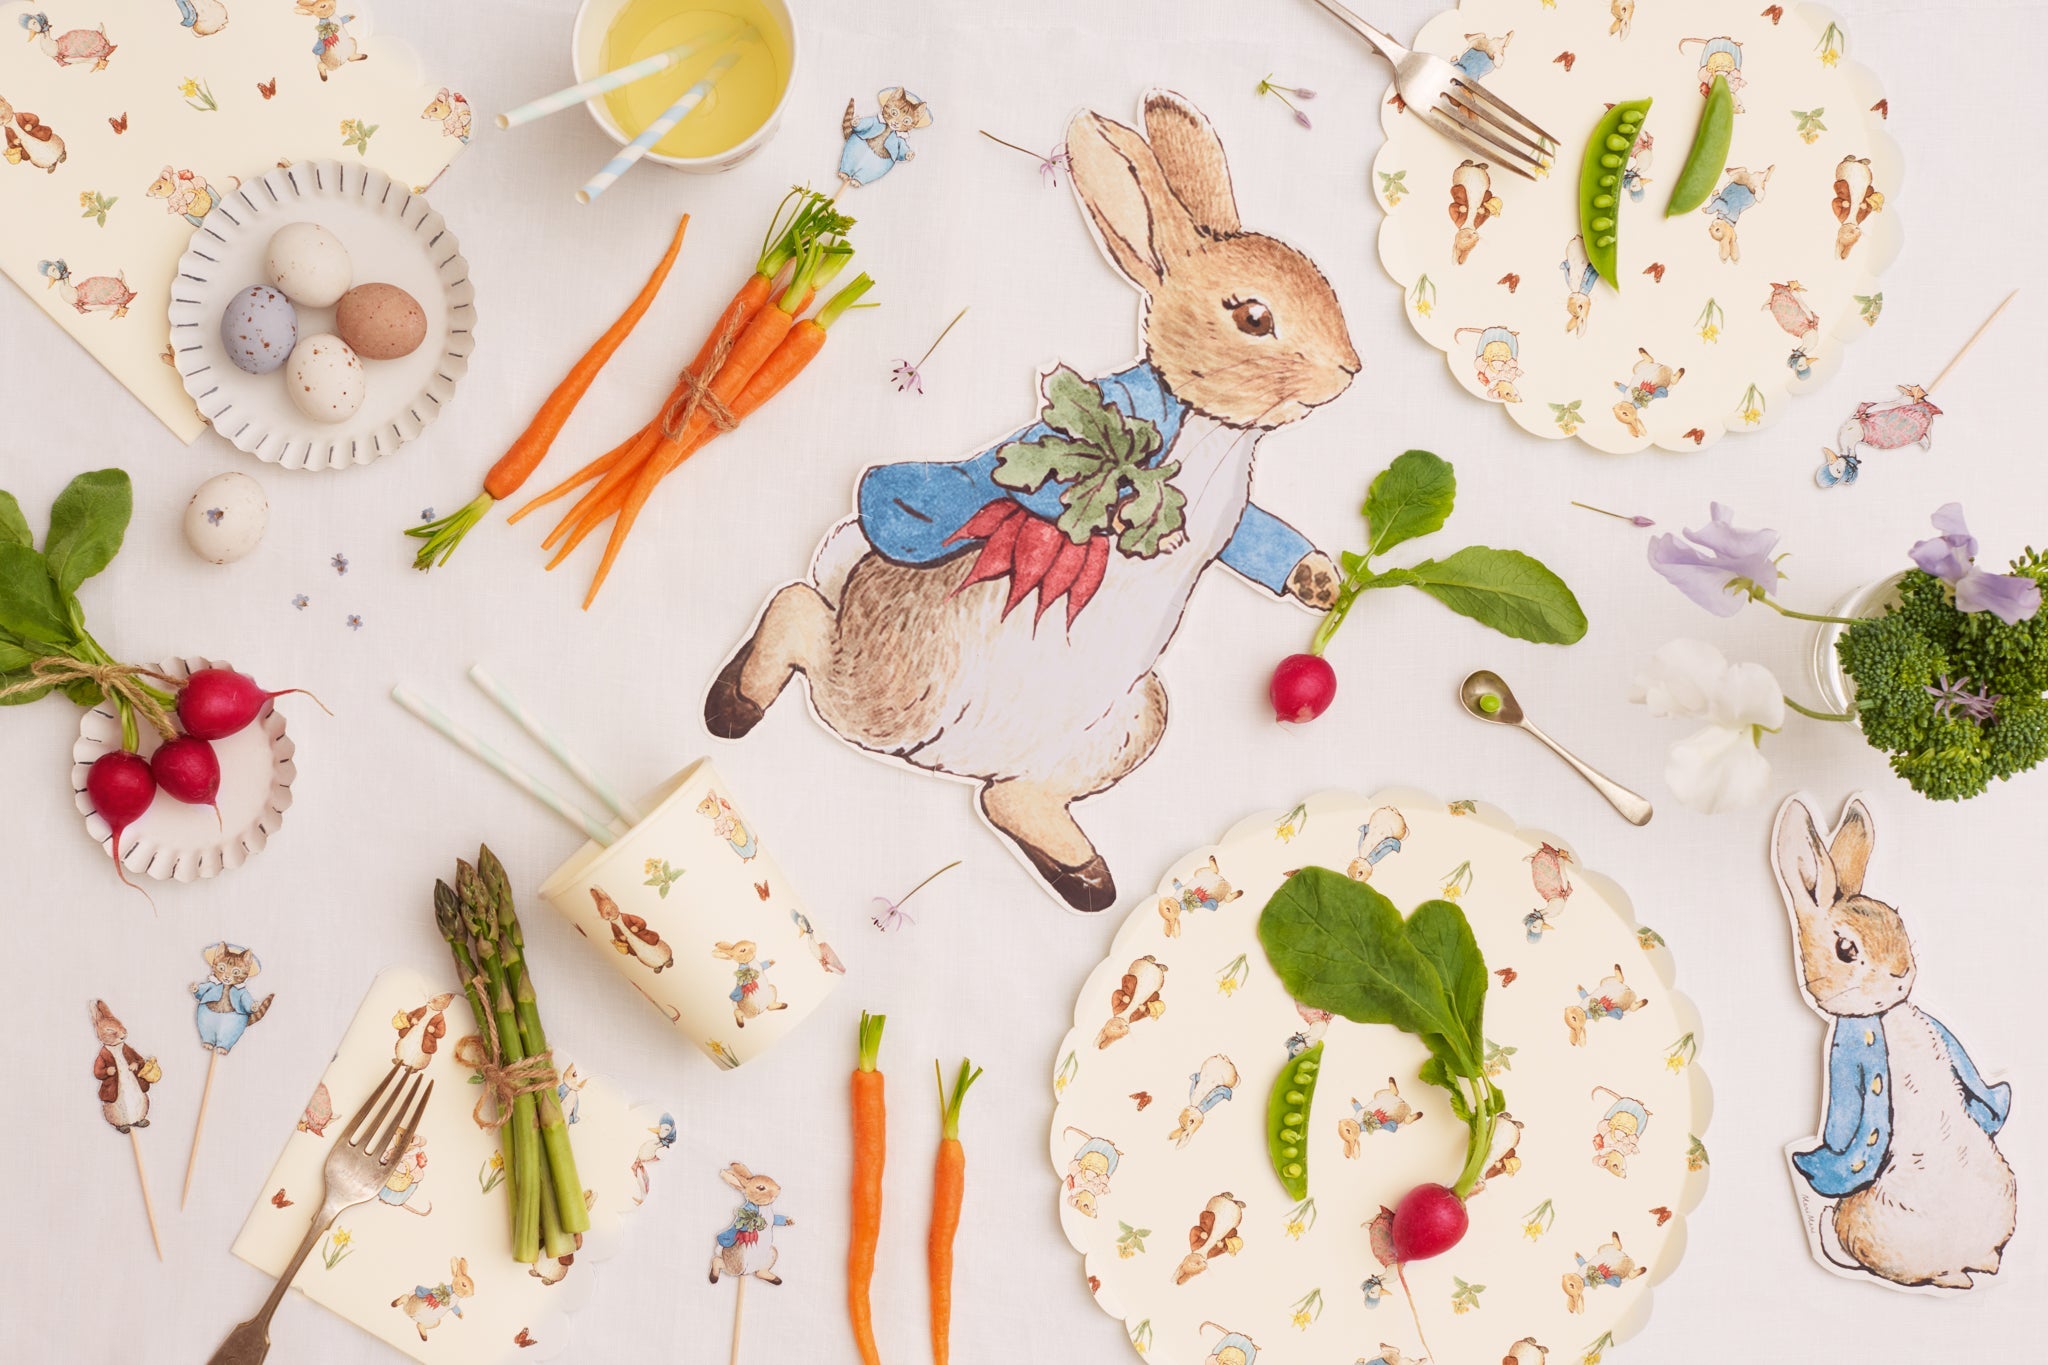 Beatrix Potter's most famous character, Peter Rabbit, comes to life with this beautiful collection of tableware, cupcake kits, and banners.